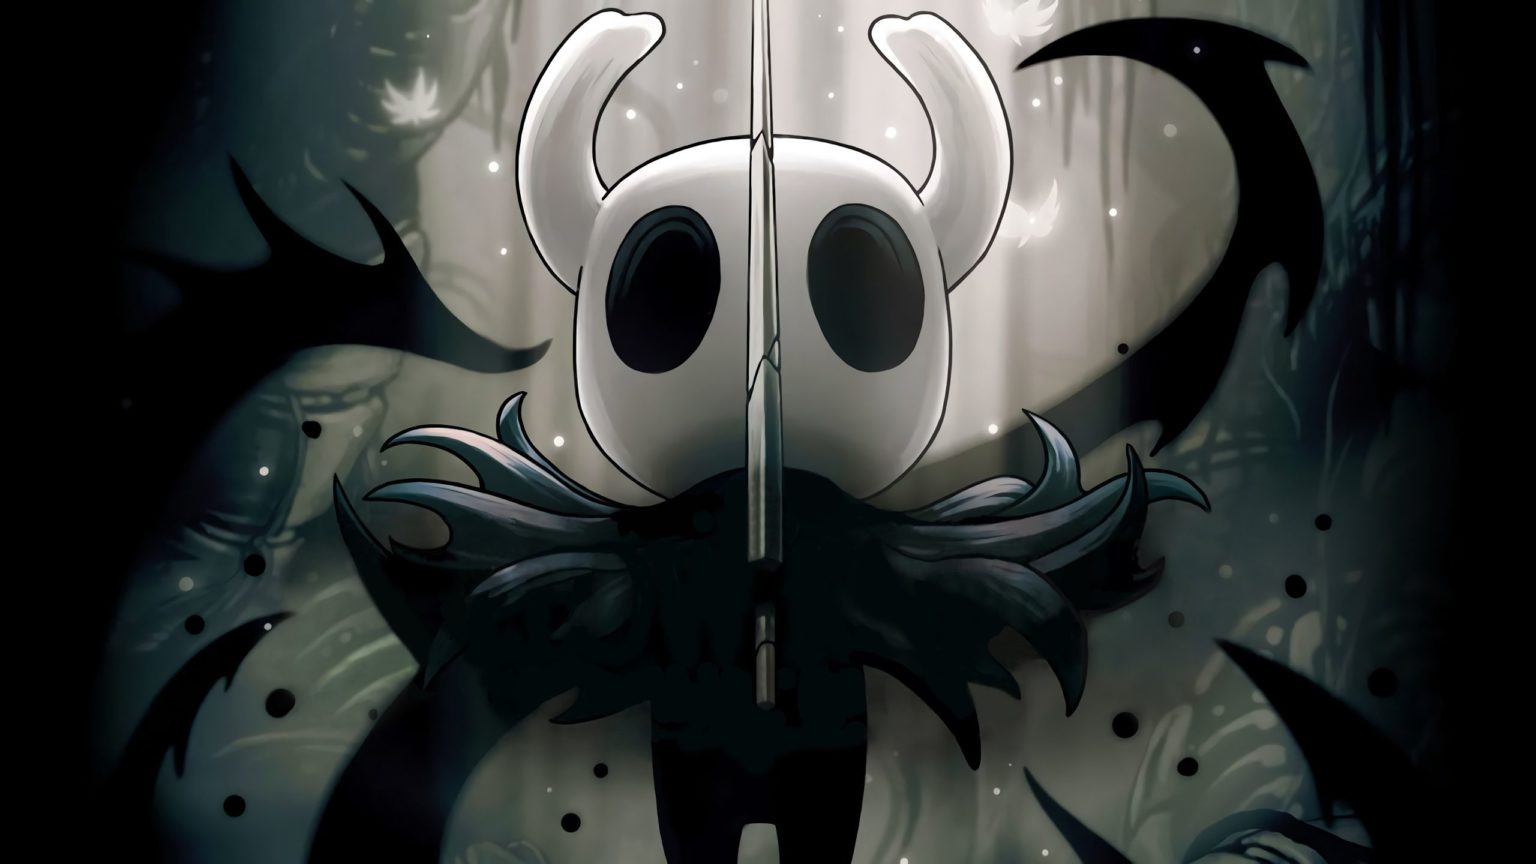 Hollow Knight Wallpapers • TrumpWallpapers